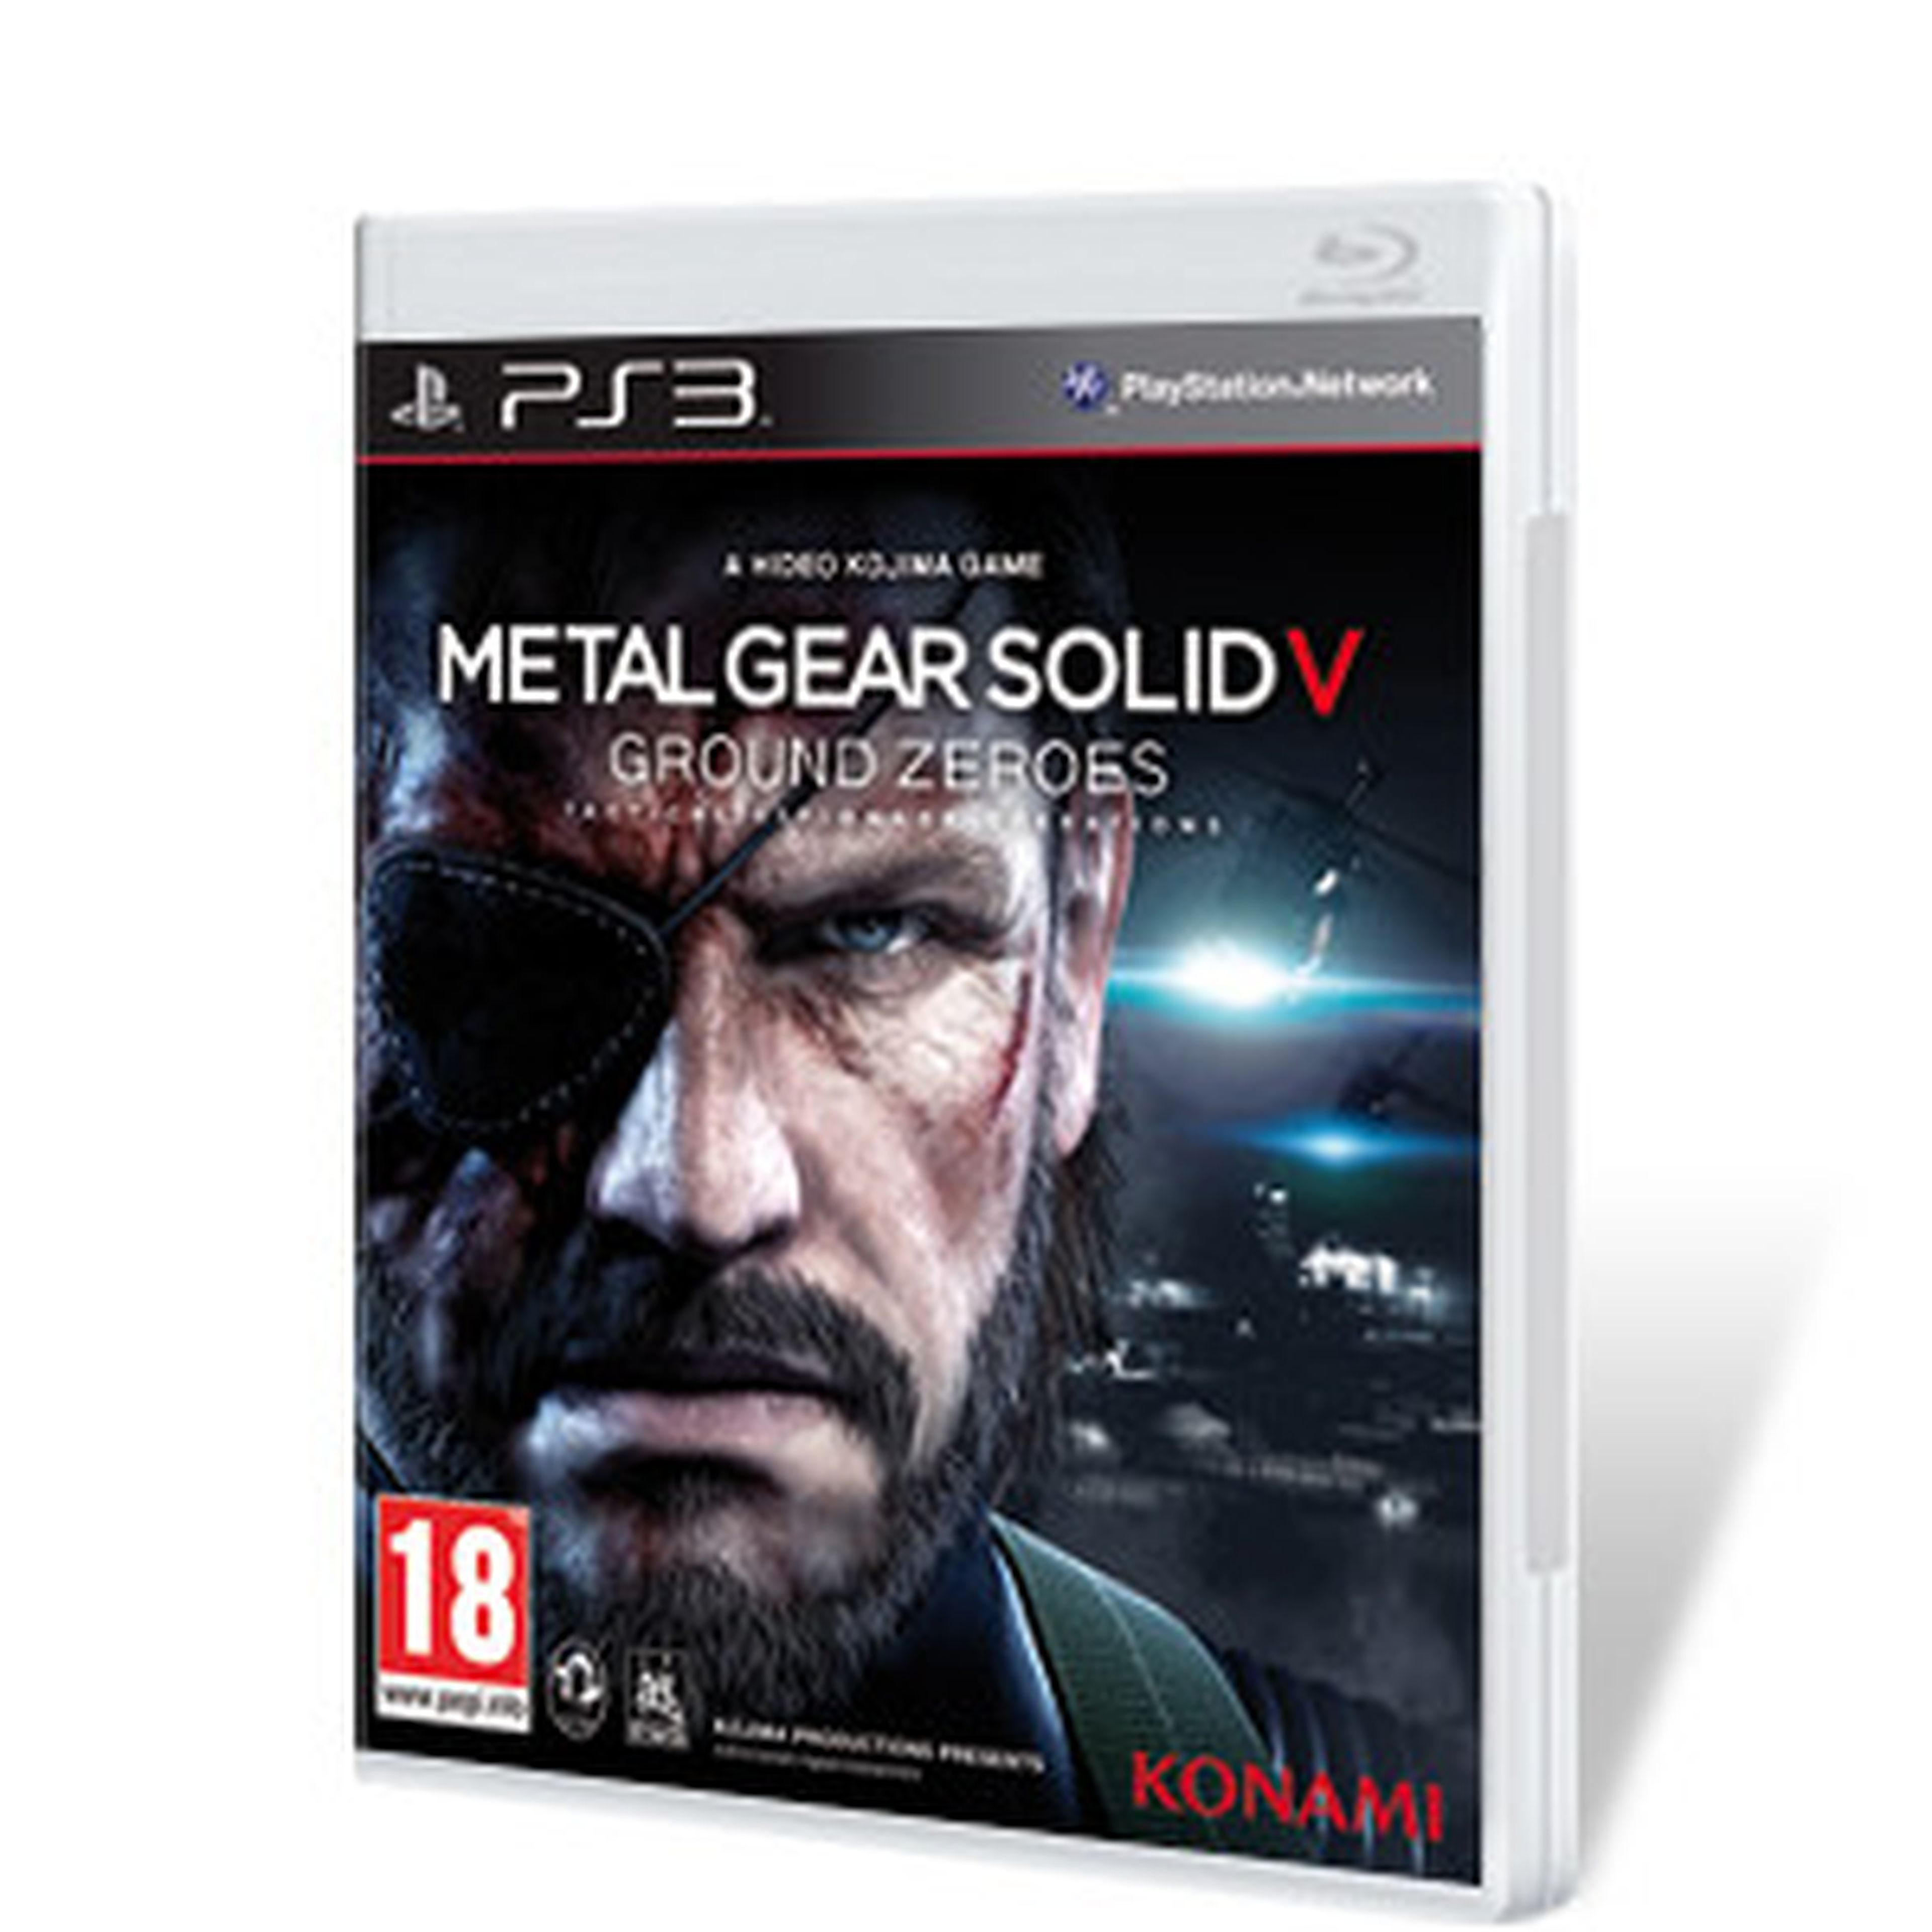 Metal Gear Solid 5 Ground Zeroes para PS3